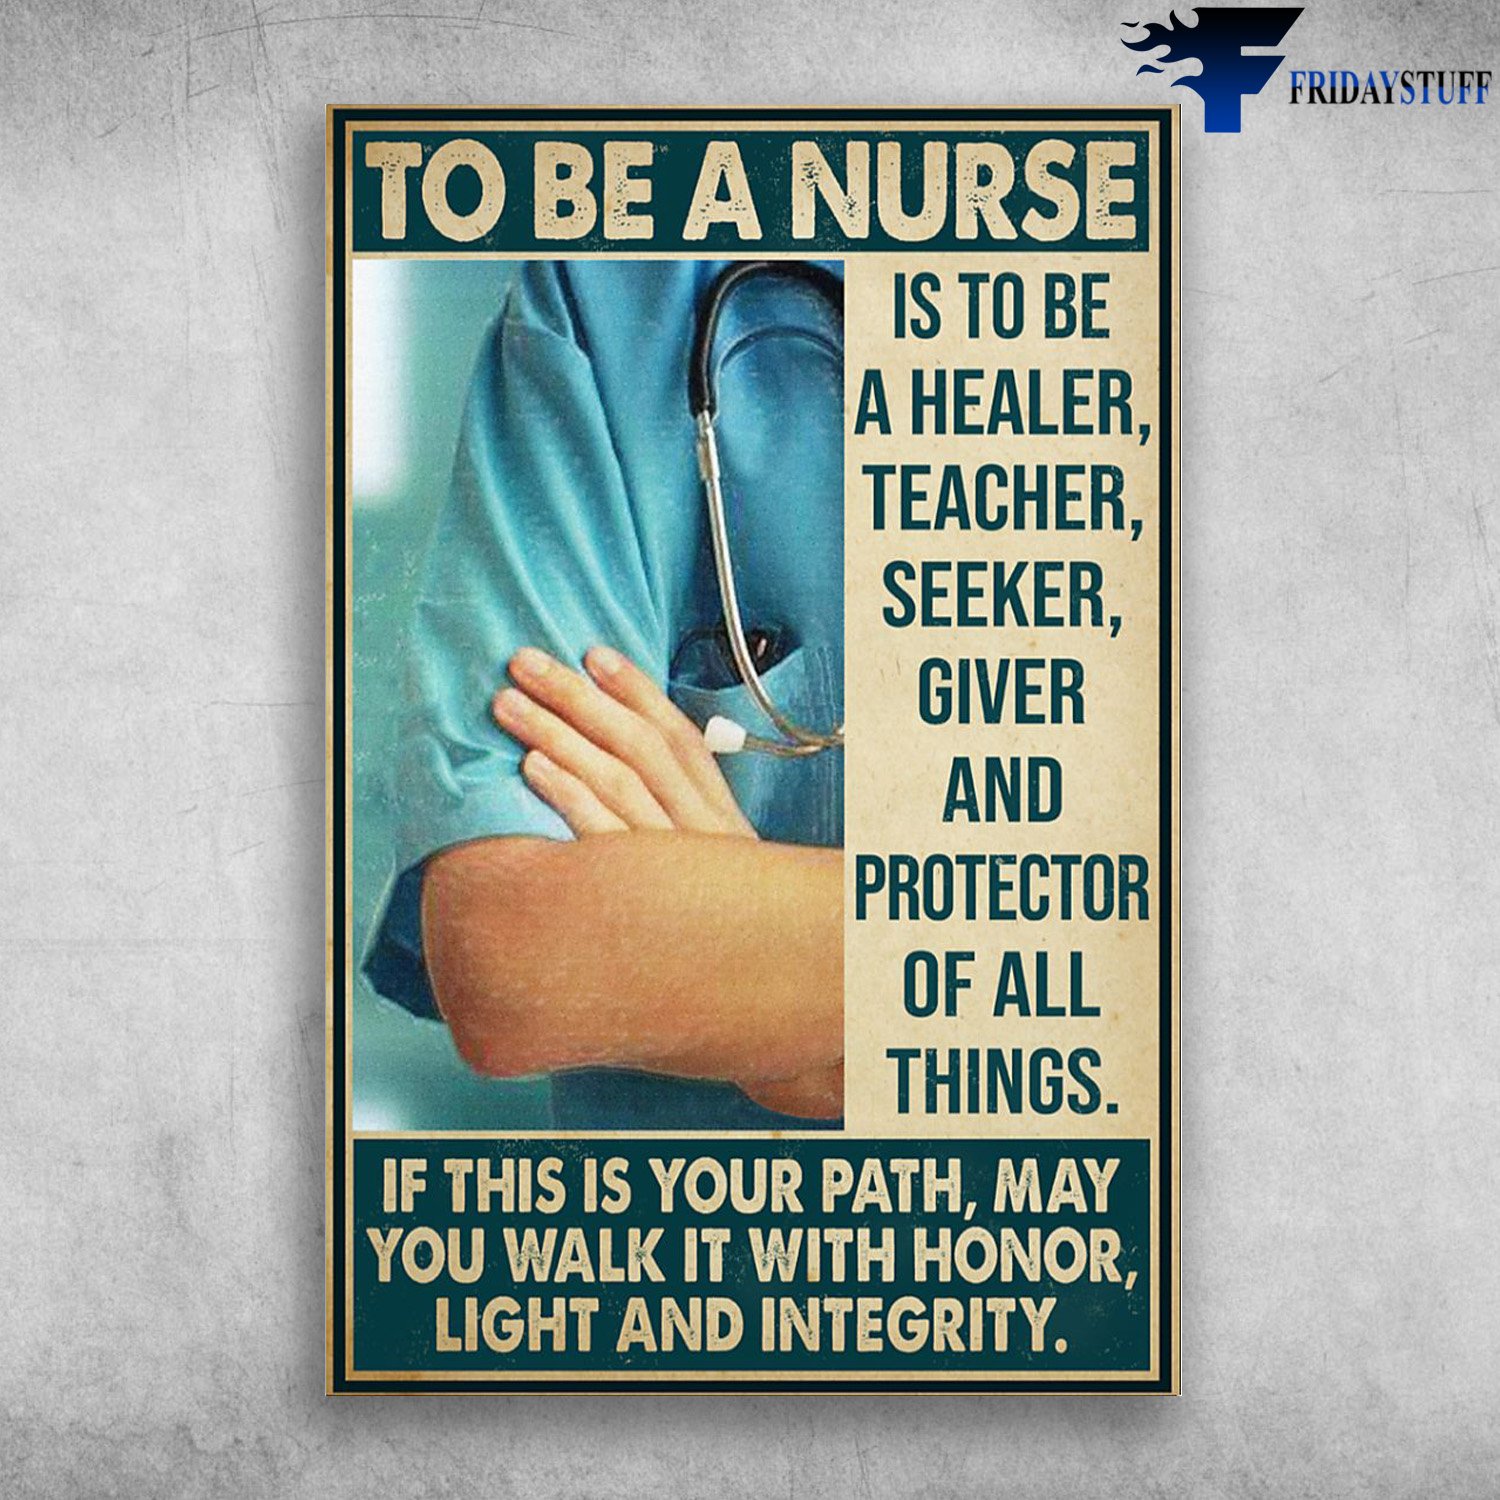 To Be A Nurse - If This Is Your Path, May You Walk It With Honor Light And Integrity